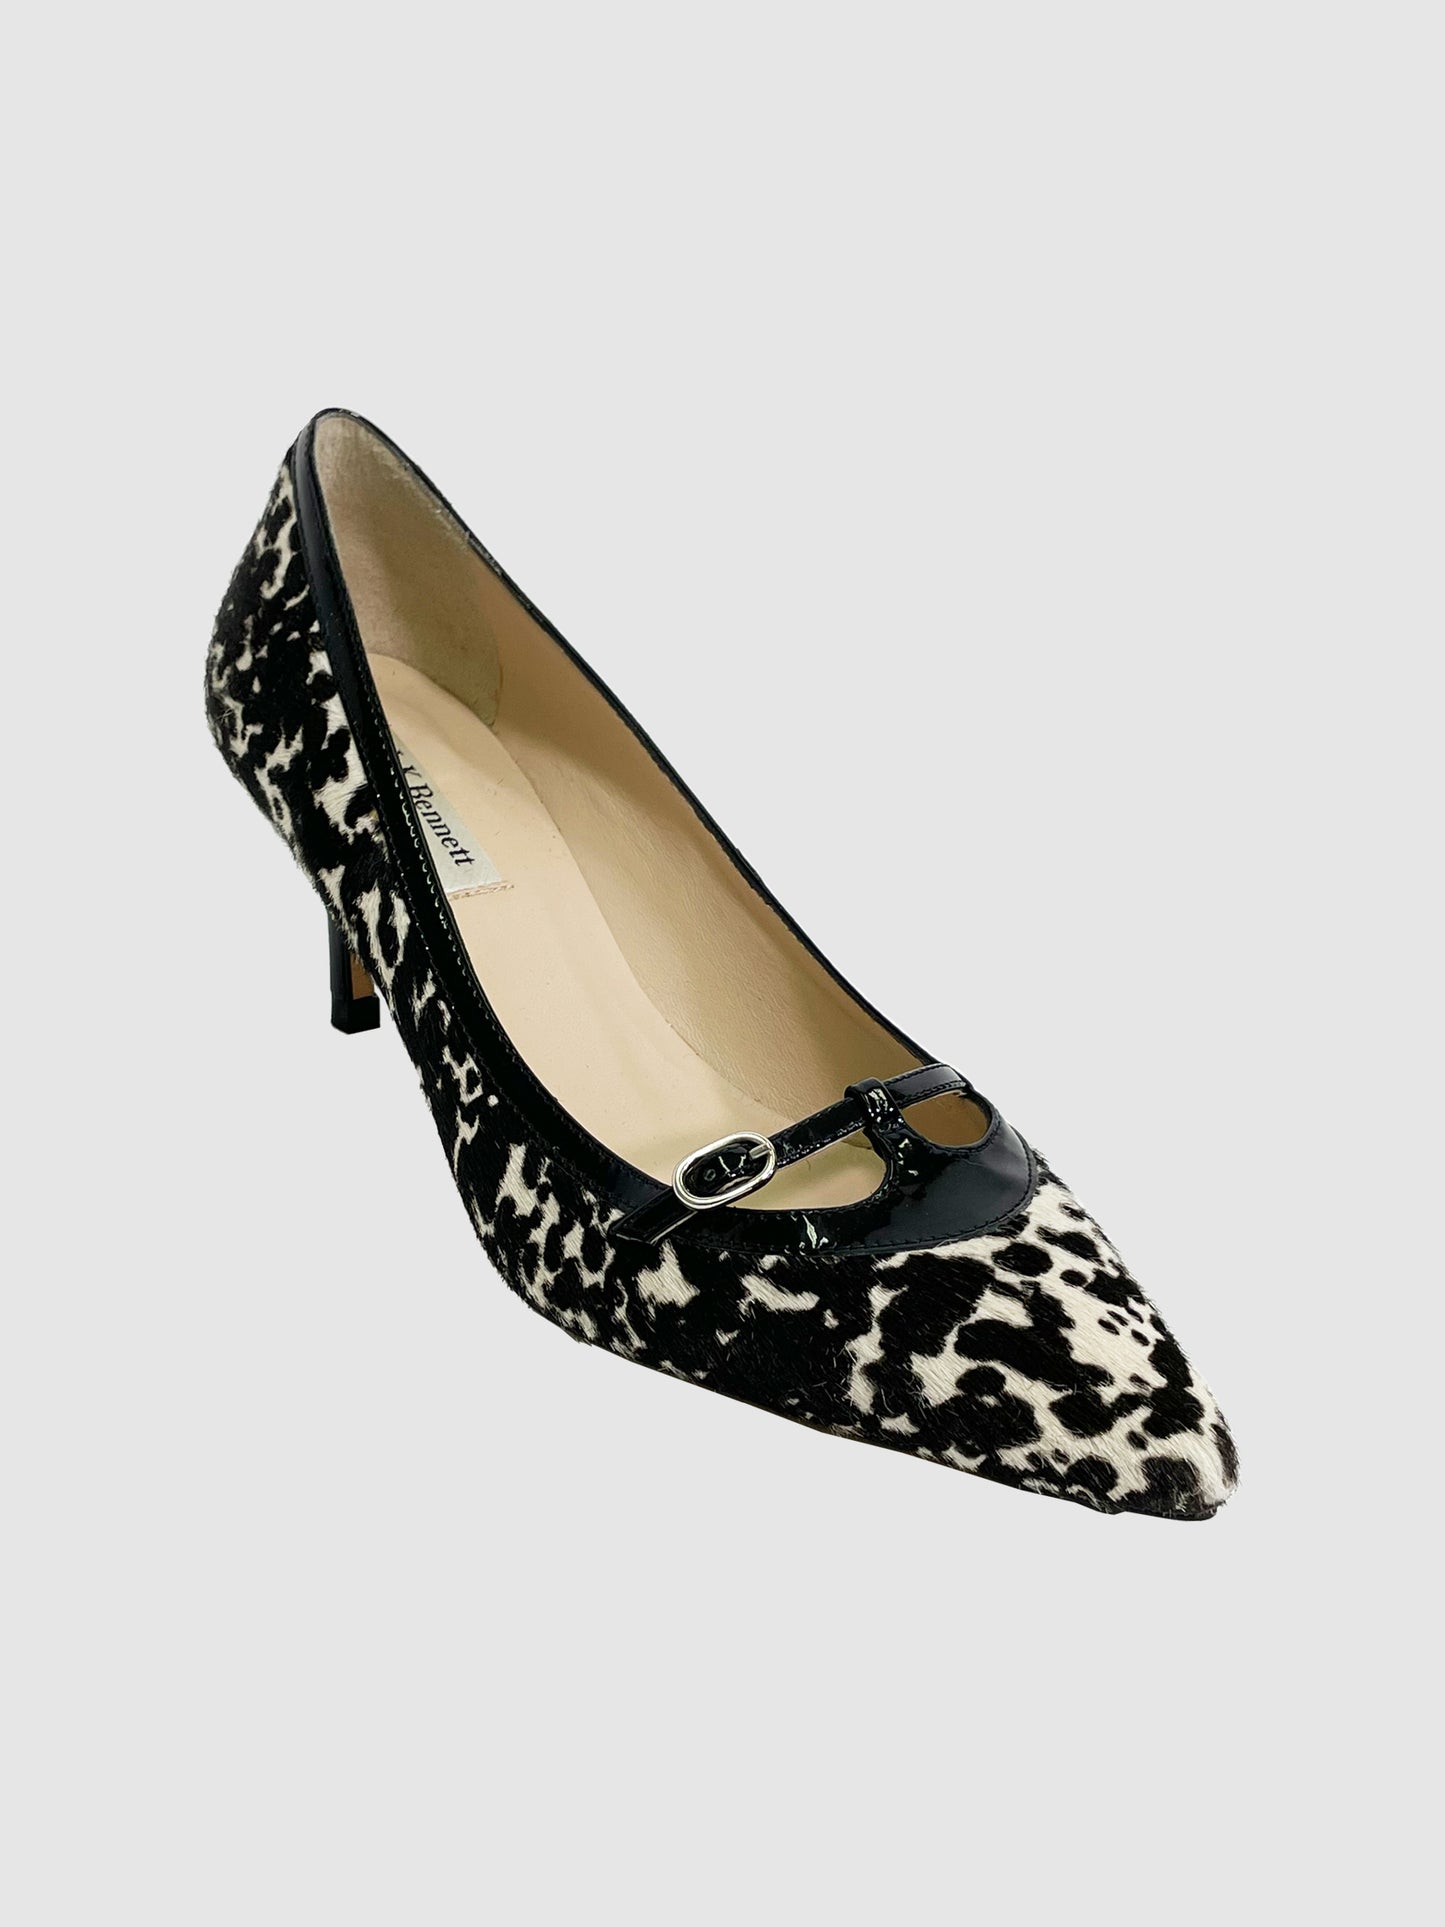 L.K. Bennett Spotted Pointy Toe Pumps - Size 38.5